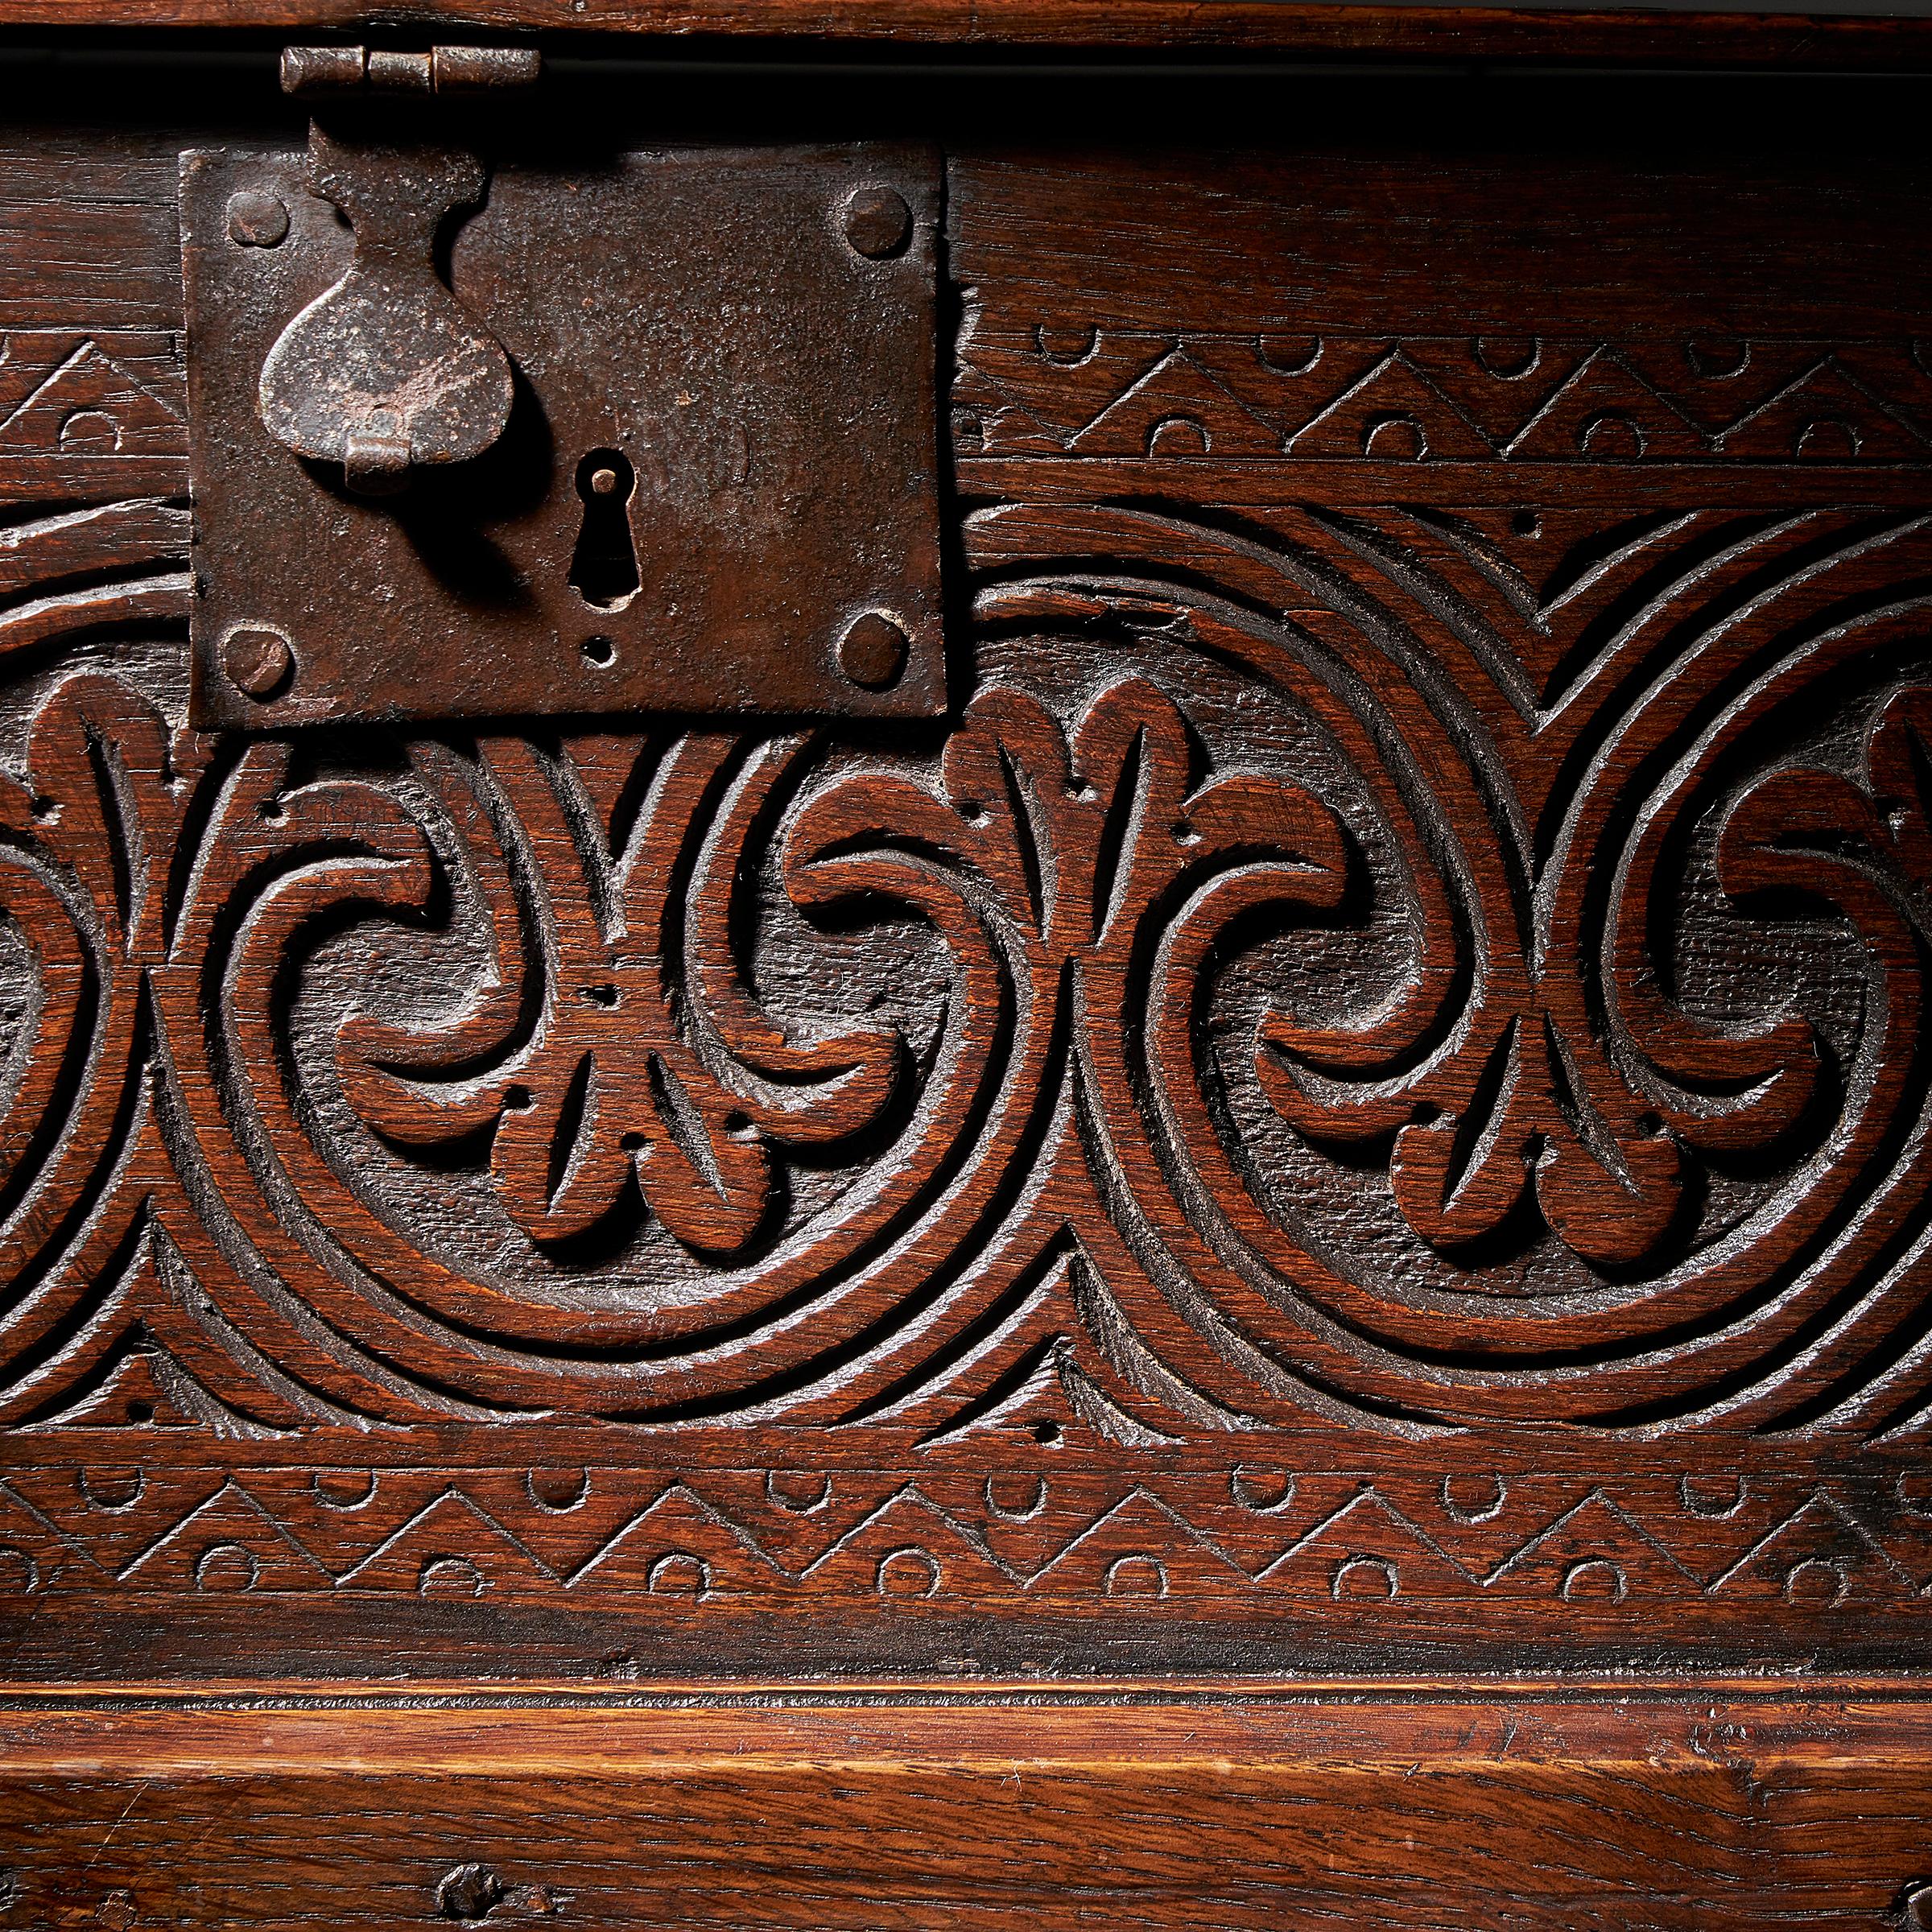 Hand-Carved Late 17th Century Charles II Carved Oak Bible, Deed, Blanket, or Candle Box